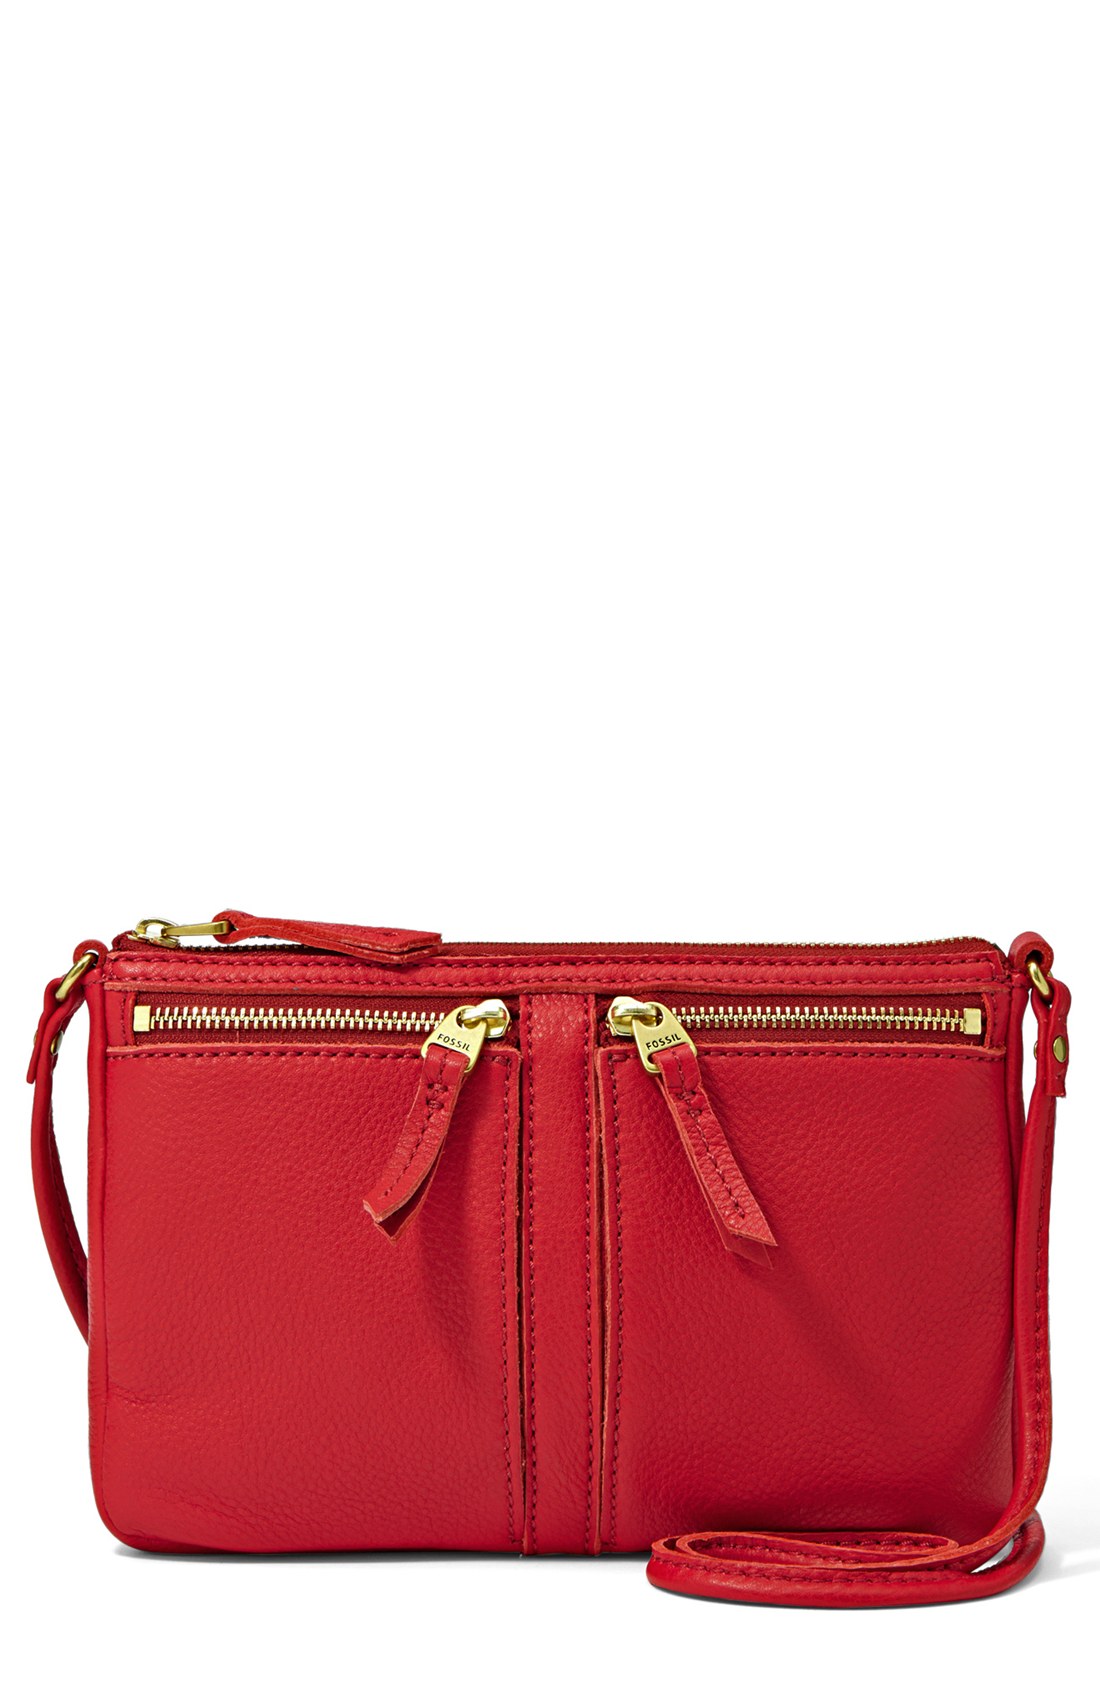 Fossil Erin Small Crossbody Bag in Red (Real Red) | Lyst